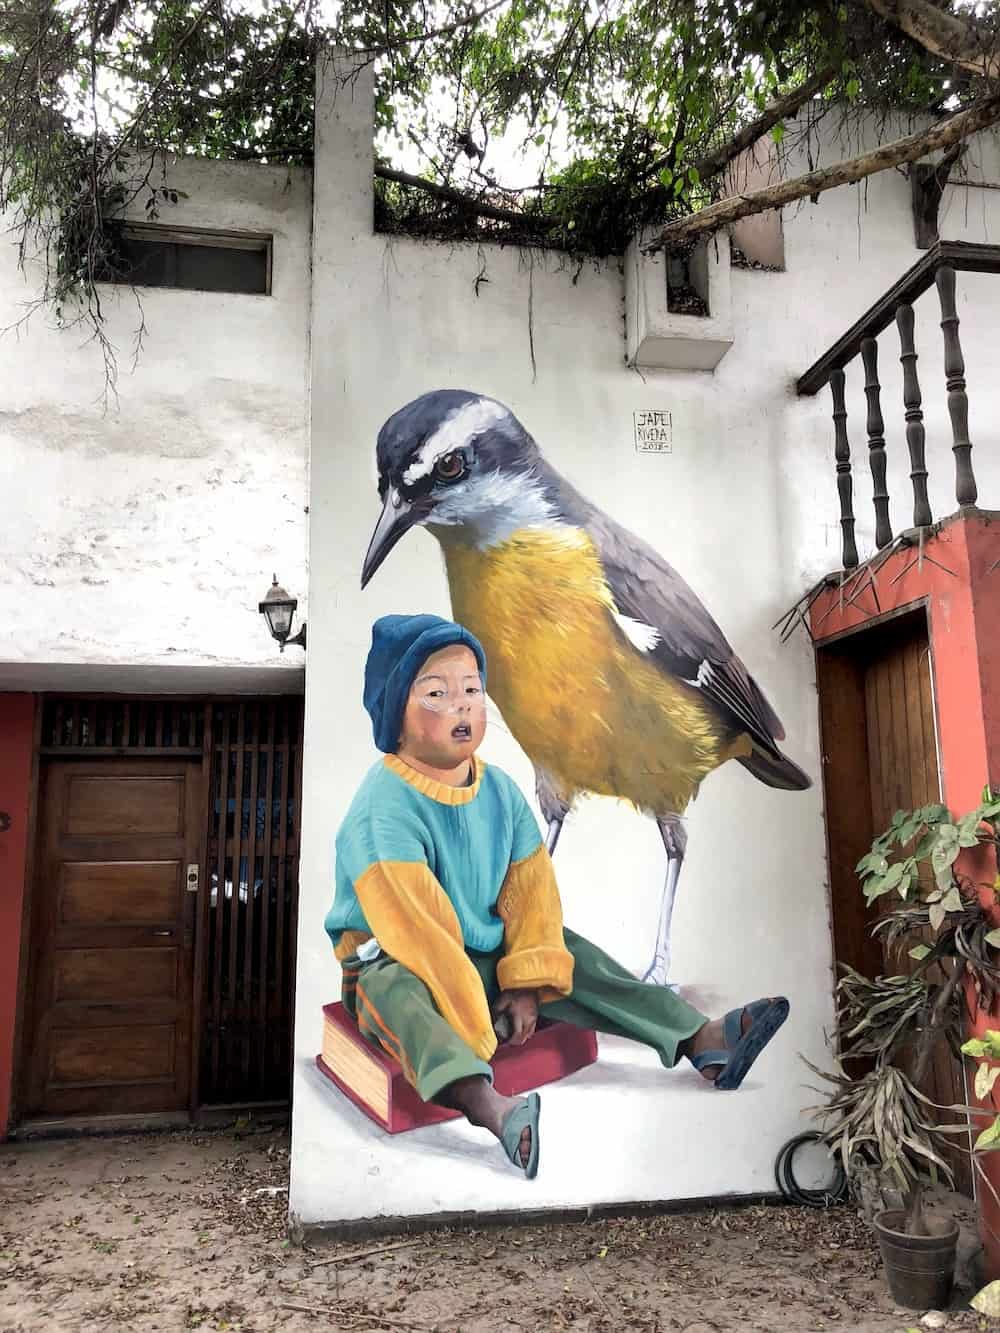 One of the best things to do in Barranco, Lima is explore this neighborhood's street art. To & Fro Fam